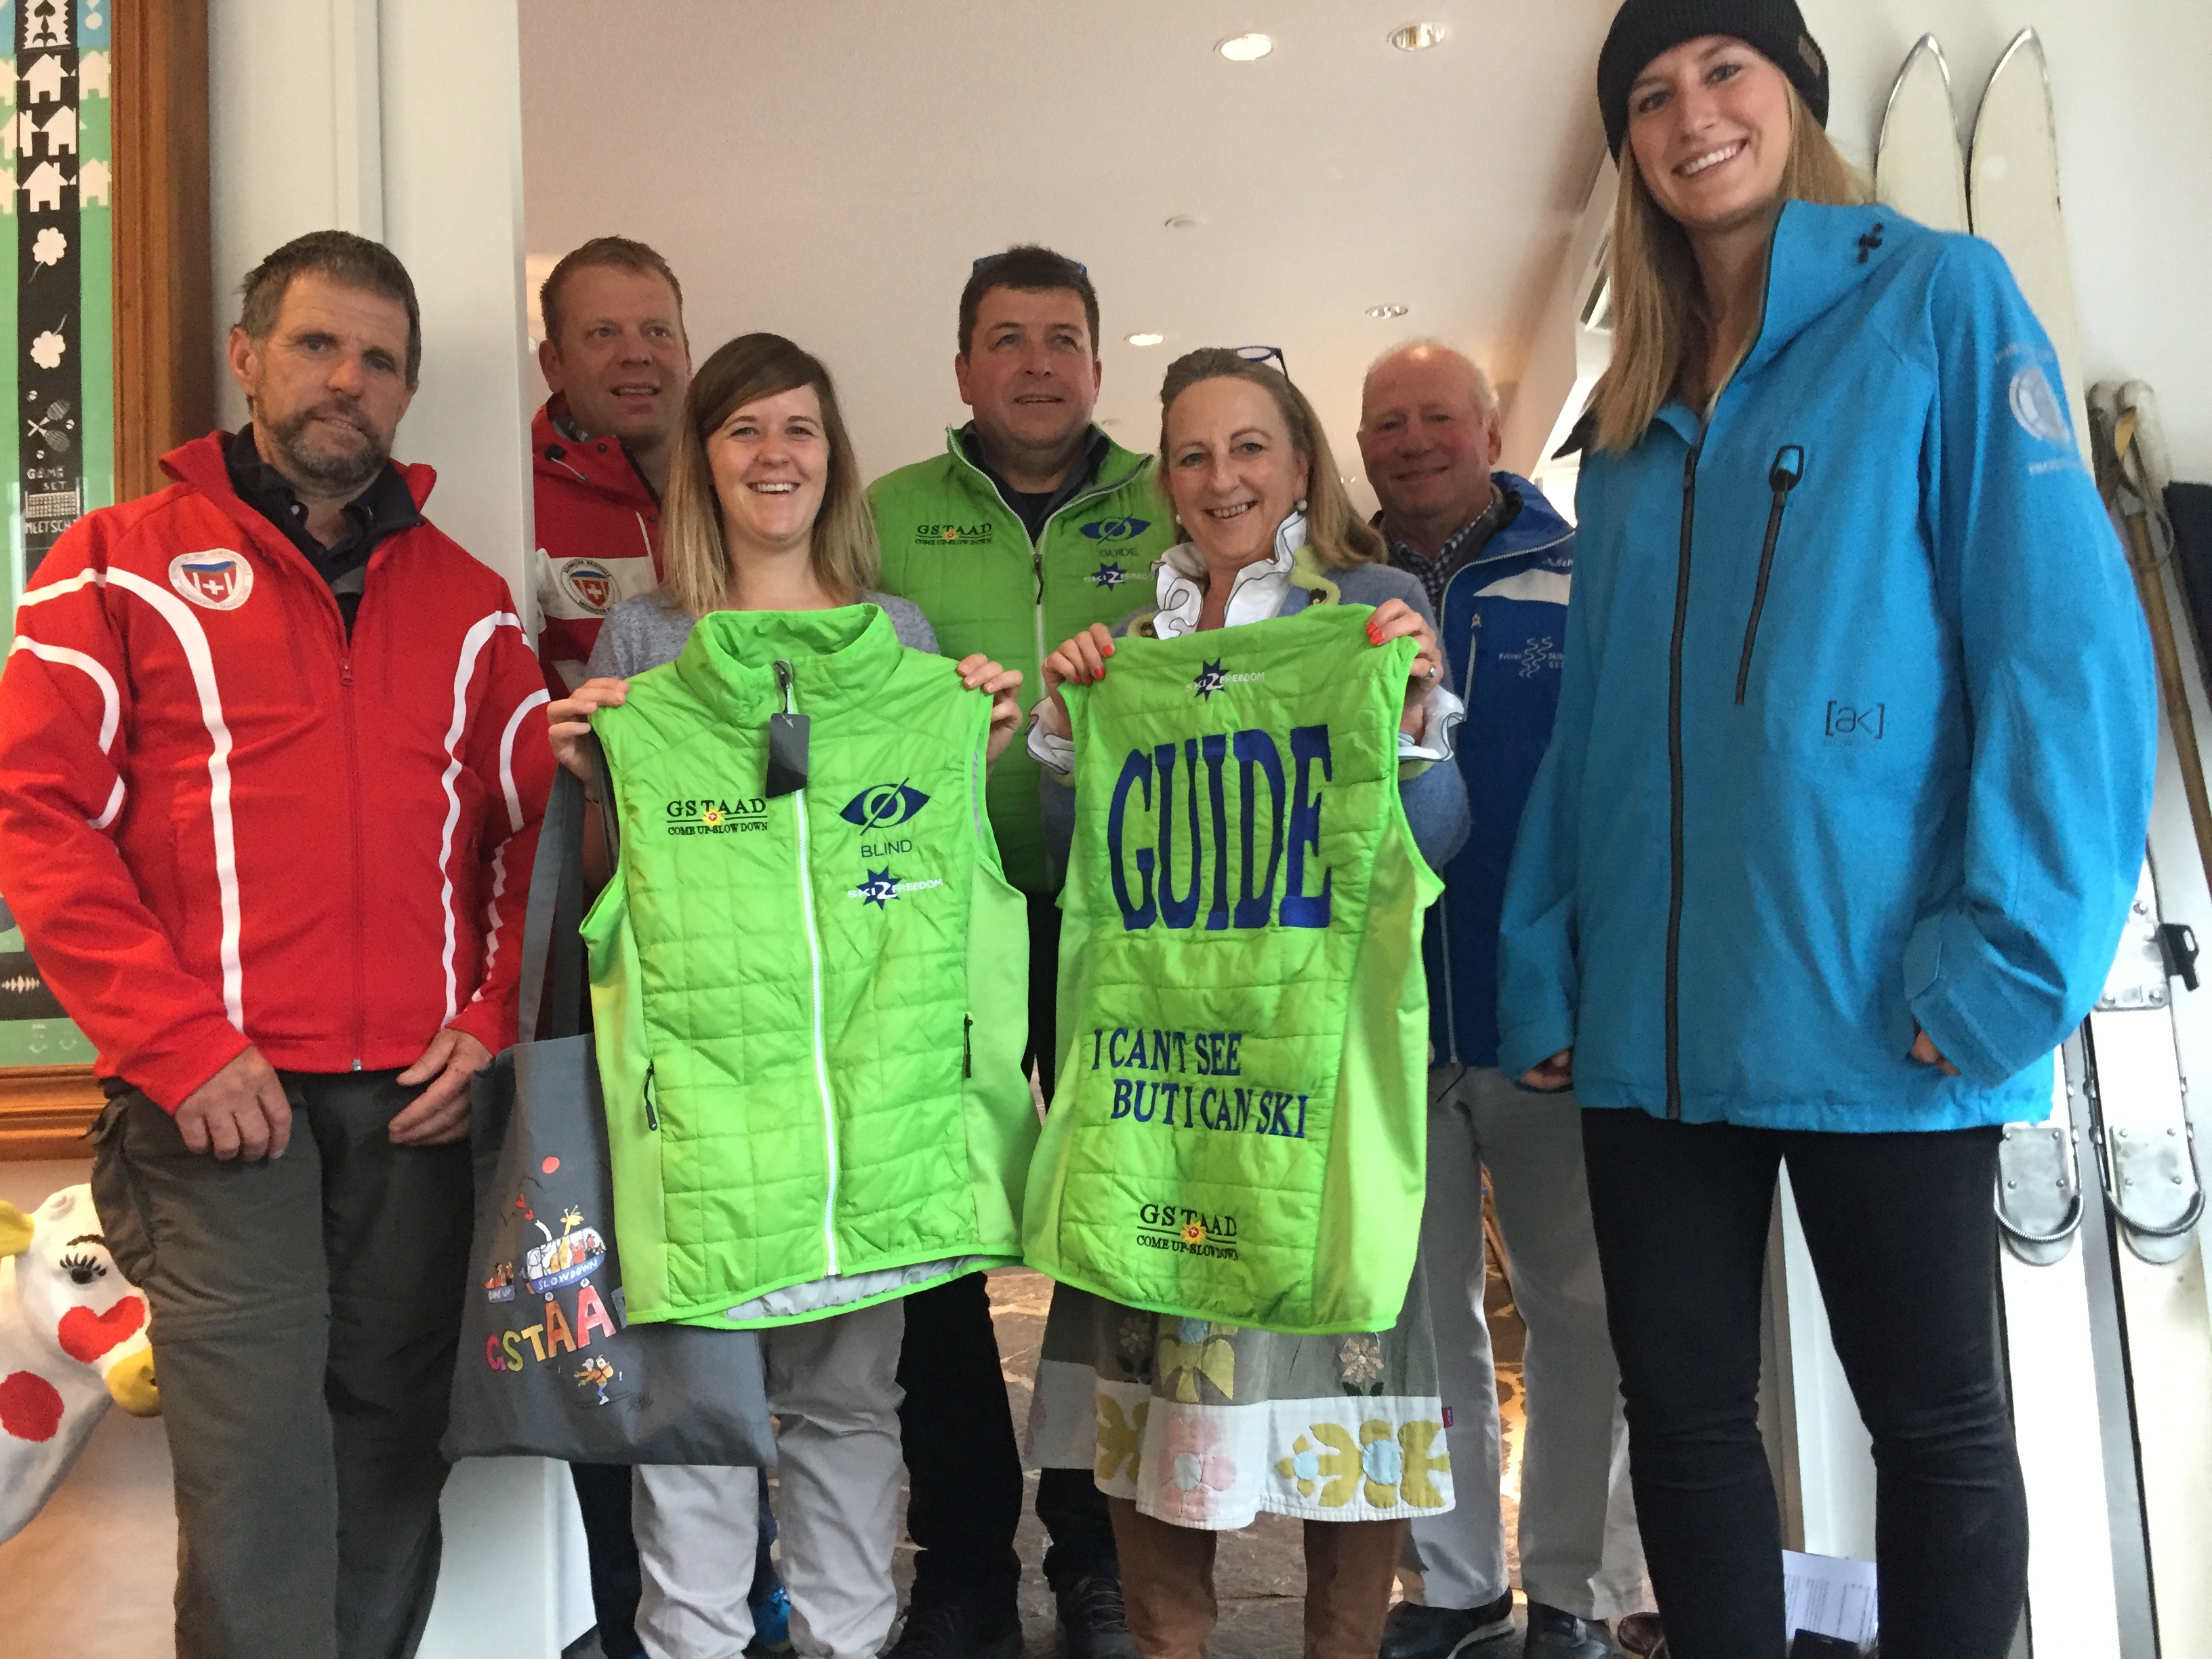 The blind skiers with Catherine Cosby of Ski 2 Freedom Foundation